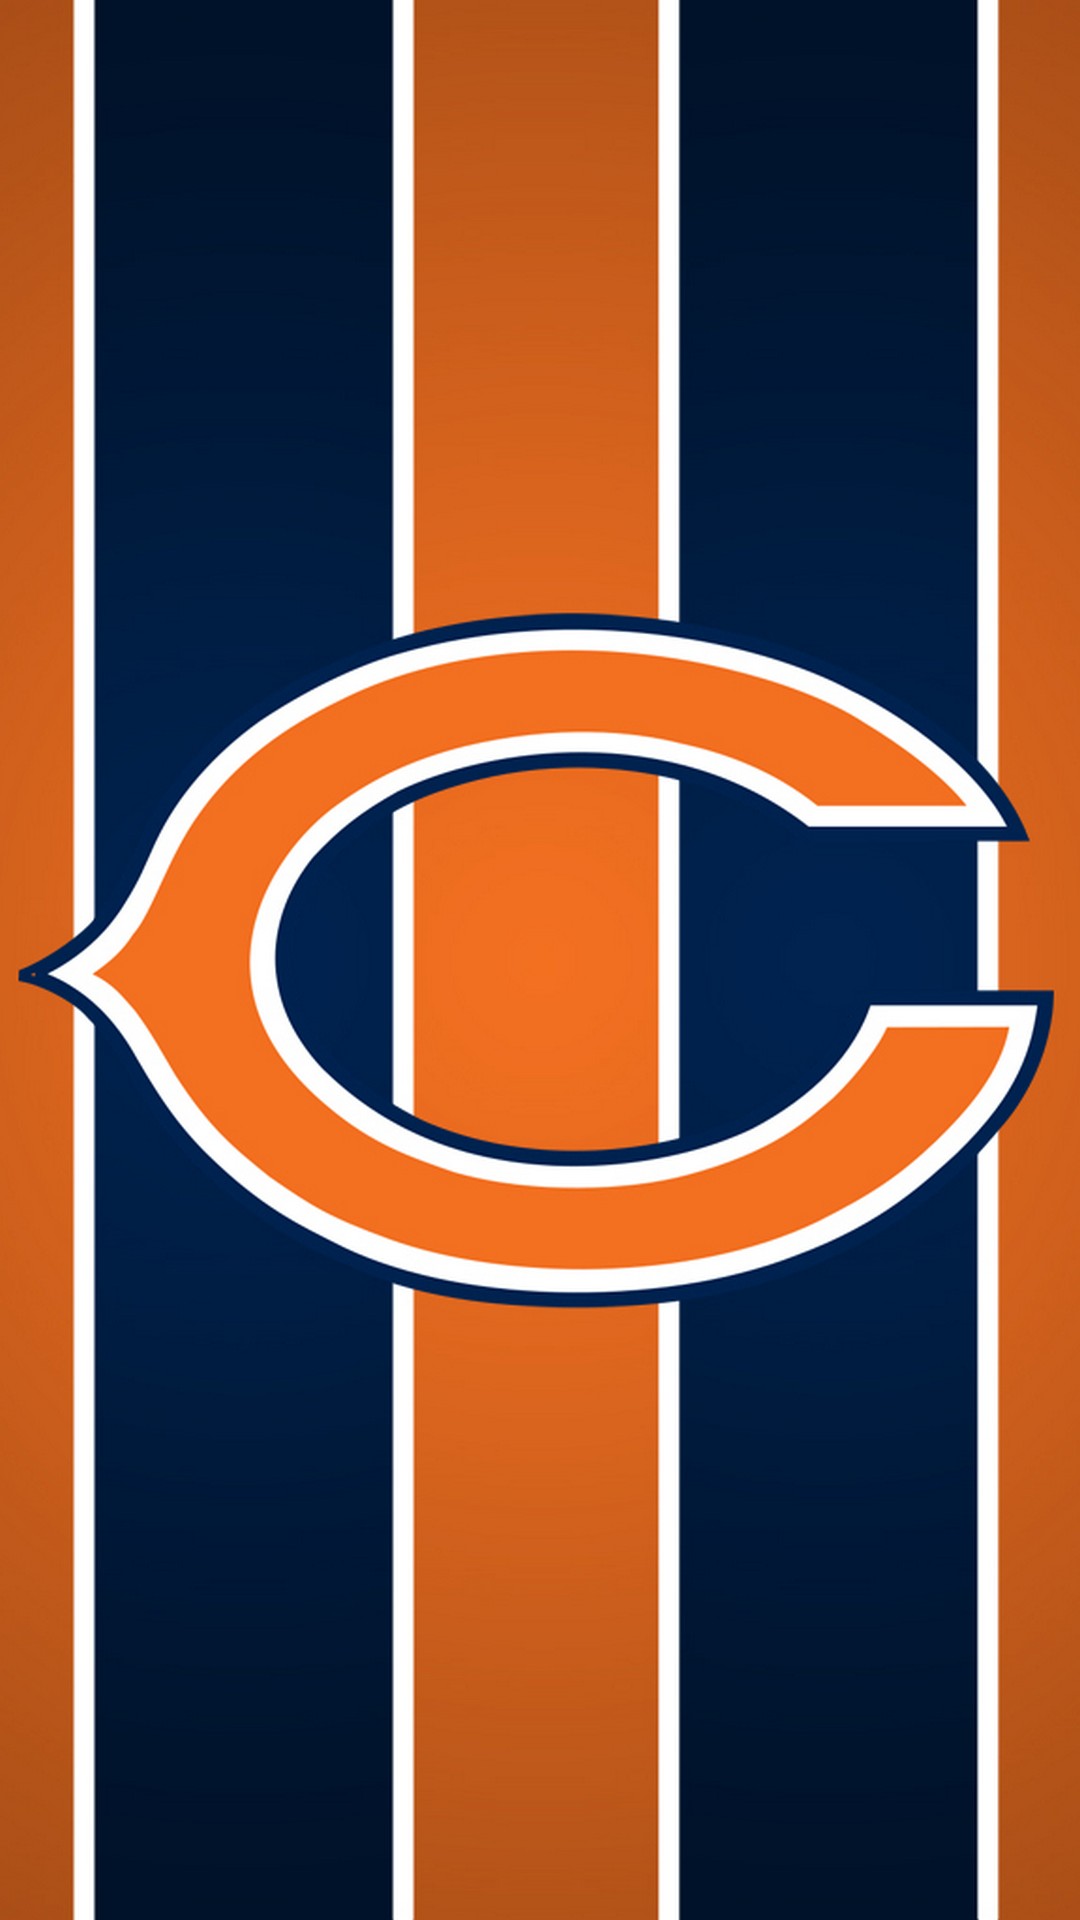 Chicago Bears iPhone Wallpaper With high-resolution 1080X1920 pixel. Download and set as wallpaper for Apple iPhone X, XS Max, XR, 8, 7, 6, SE, iPad, Android